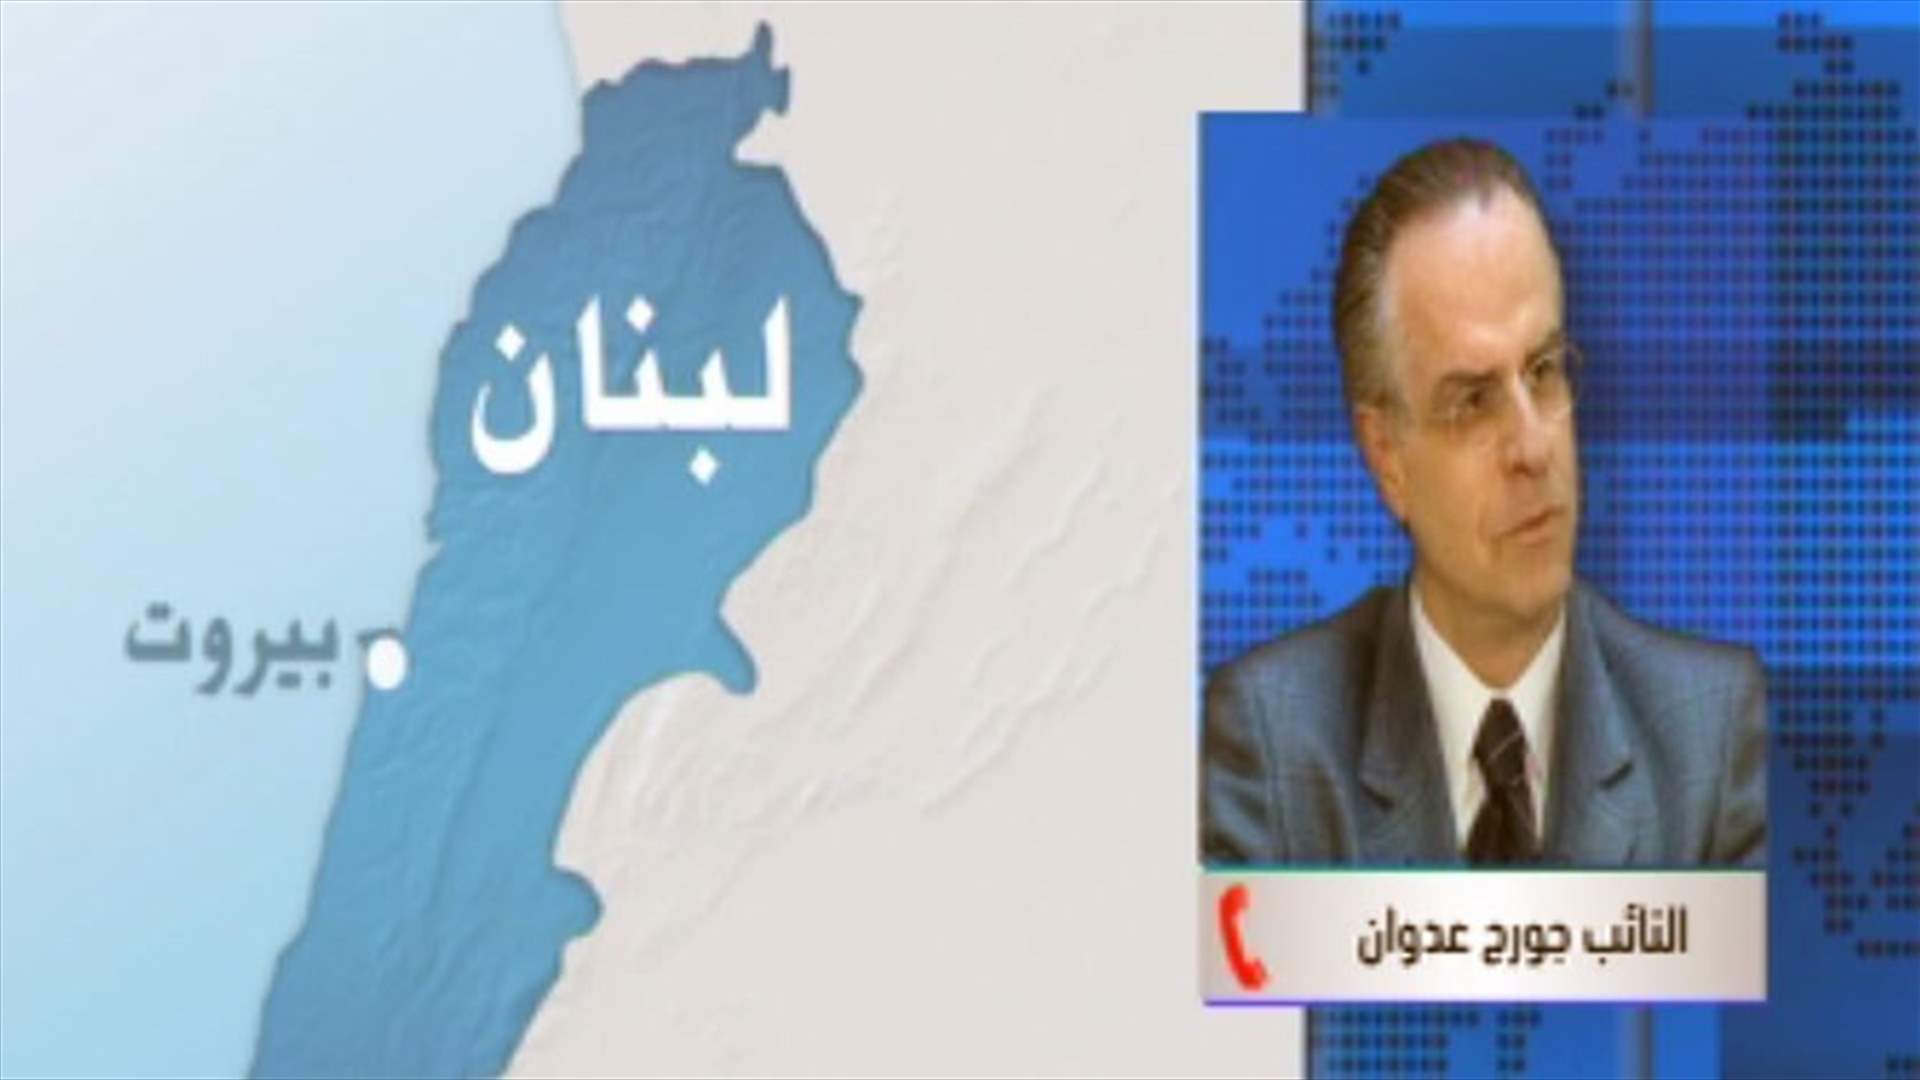 MP Adwan to LBCI: LF wants private sector’s participation in producing electricity